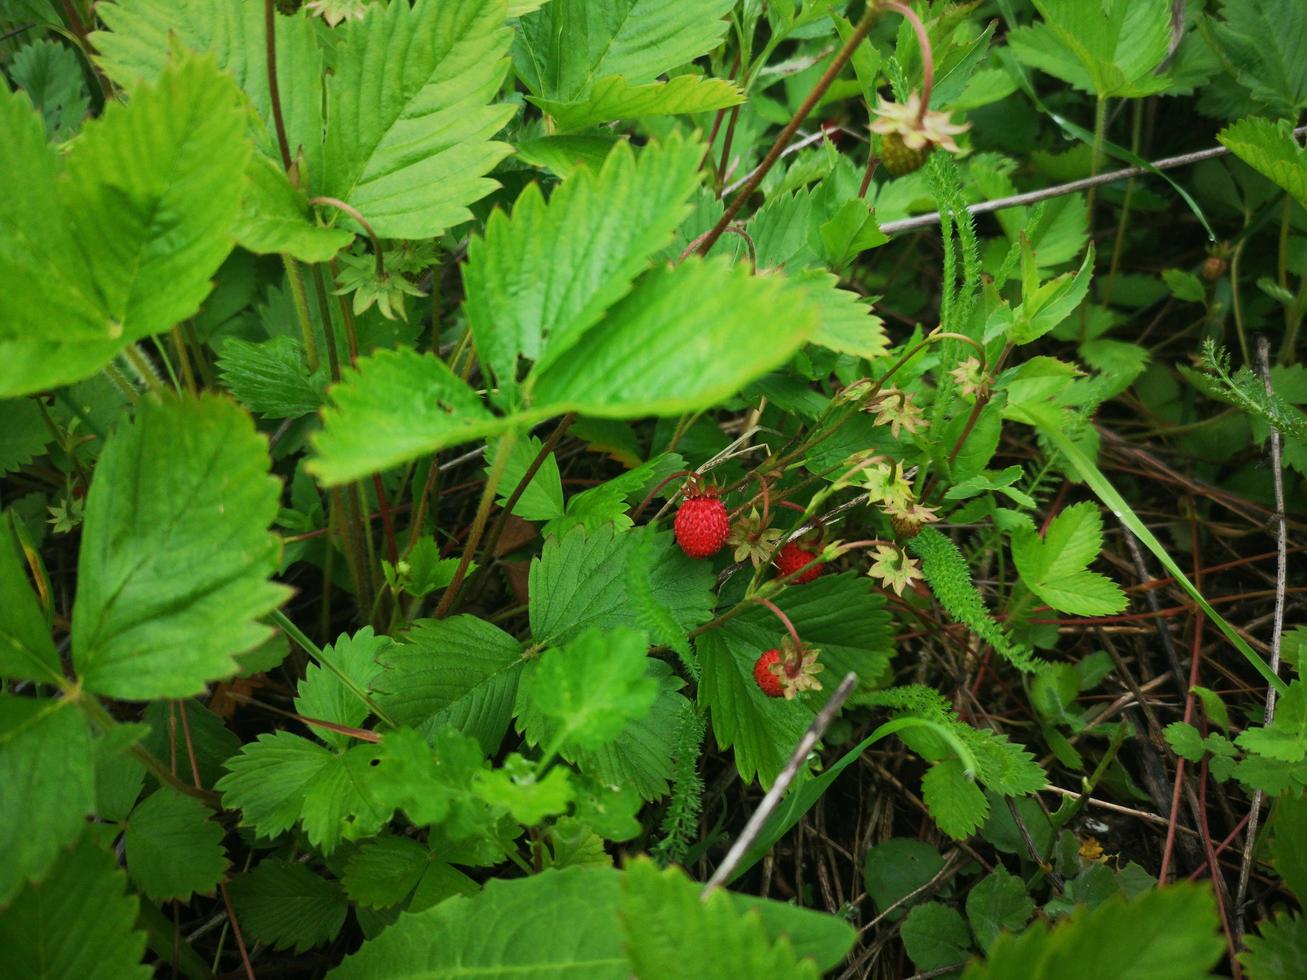 Wild strawberries on a background of leaves. Small single berry. Ripe strawberries photo